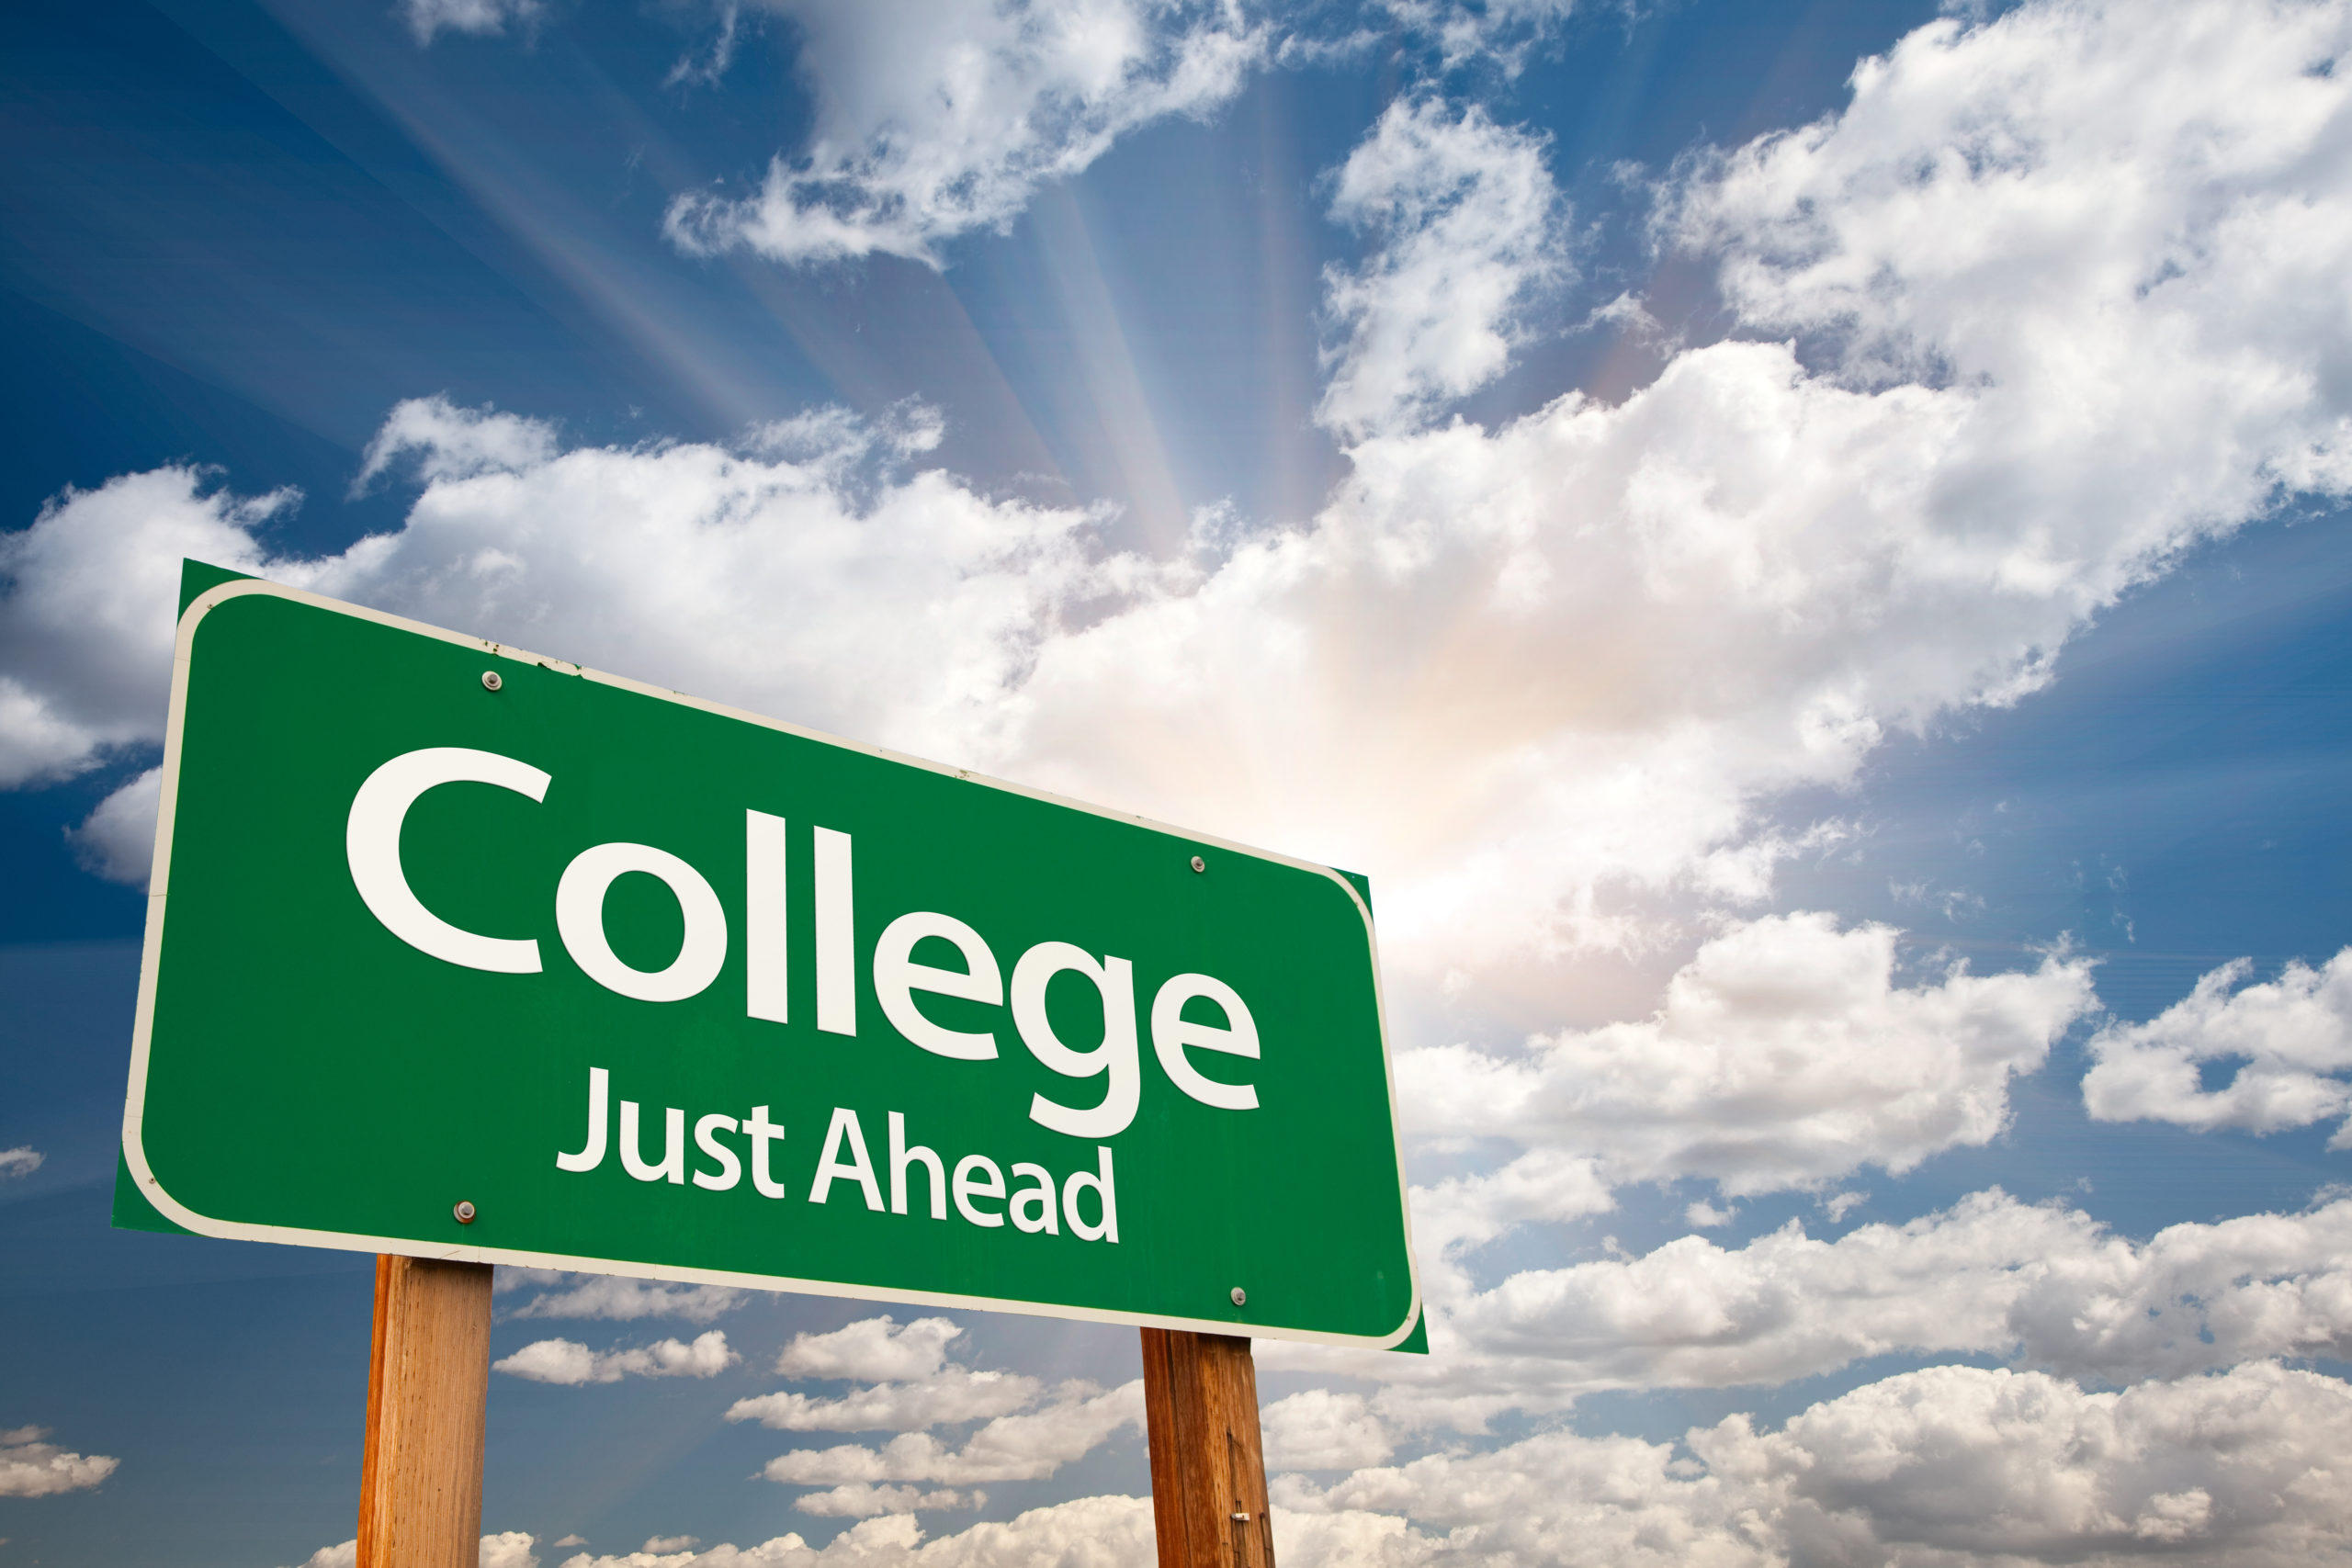 10 Resources for Making Your College Decision from Home during COVID-19